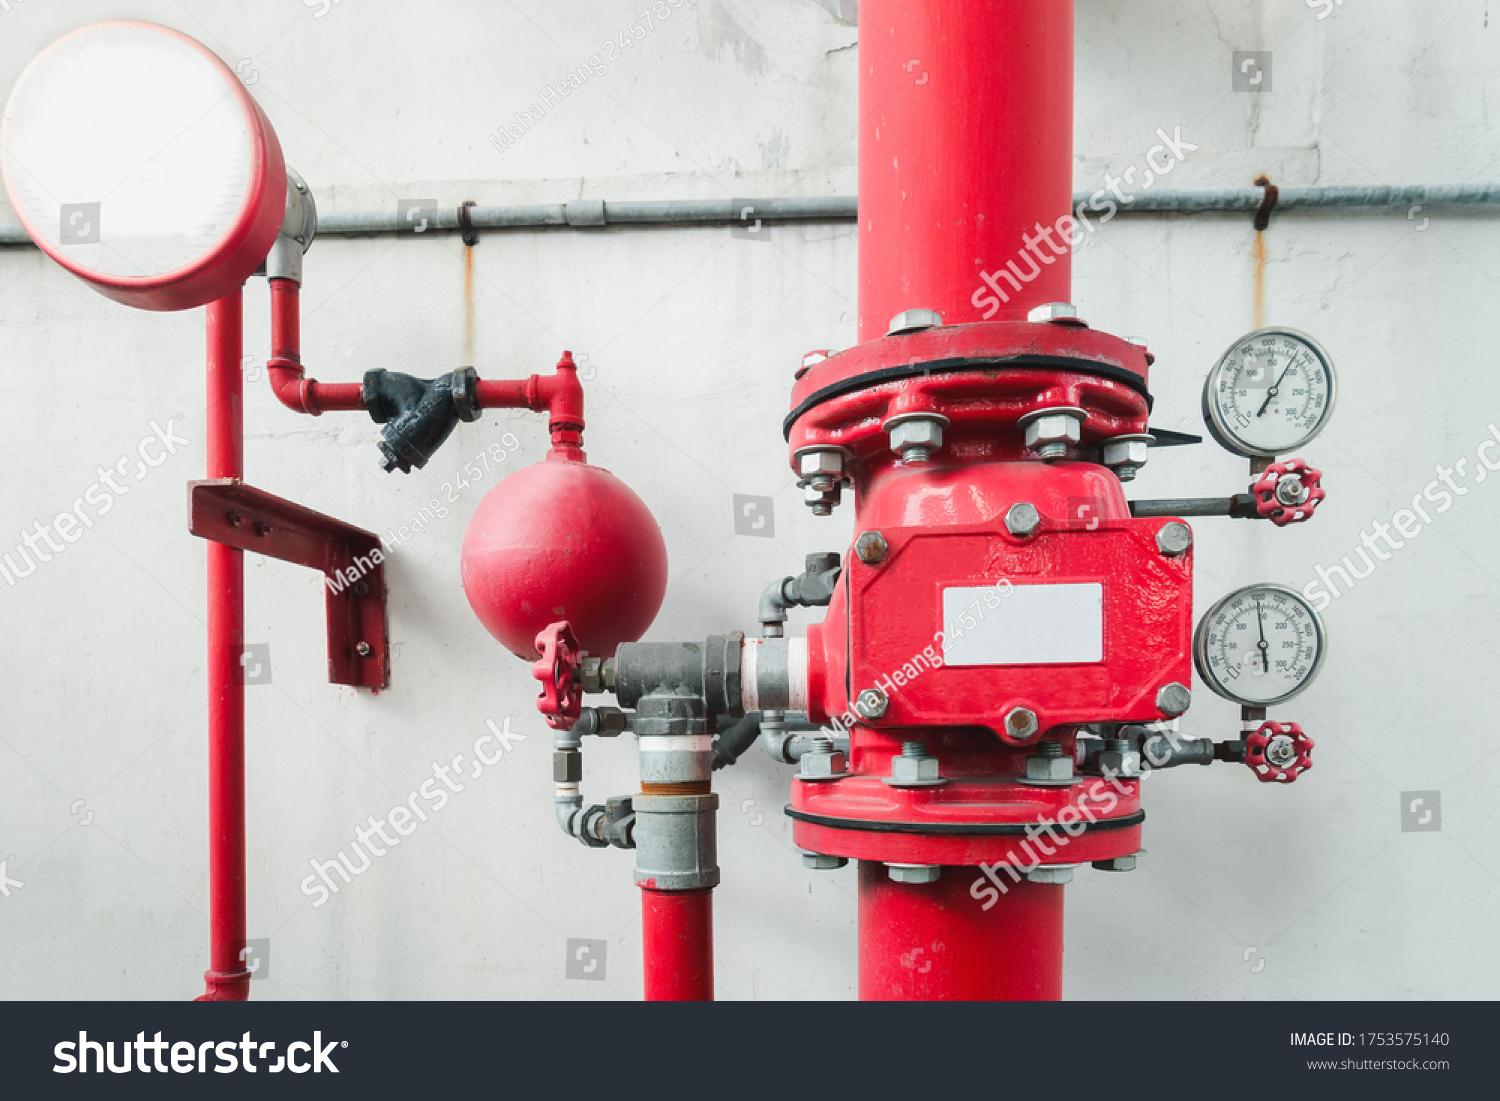 Industrial Fire Extinguishing and Control for Safety System, Fire Protection Alarm and Pipeline Equipment. Sprinkler Water Pipe Controller Station for Fire Prevention Systems, Factory Extinguisher #1753575140